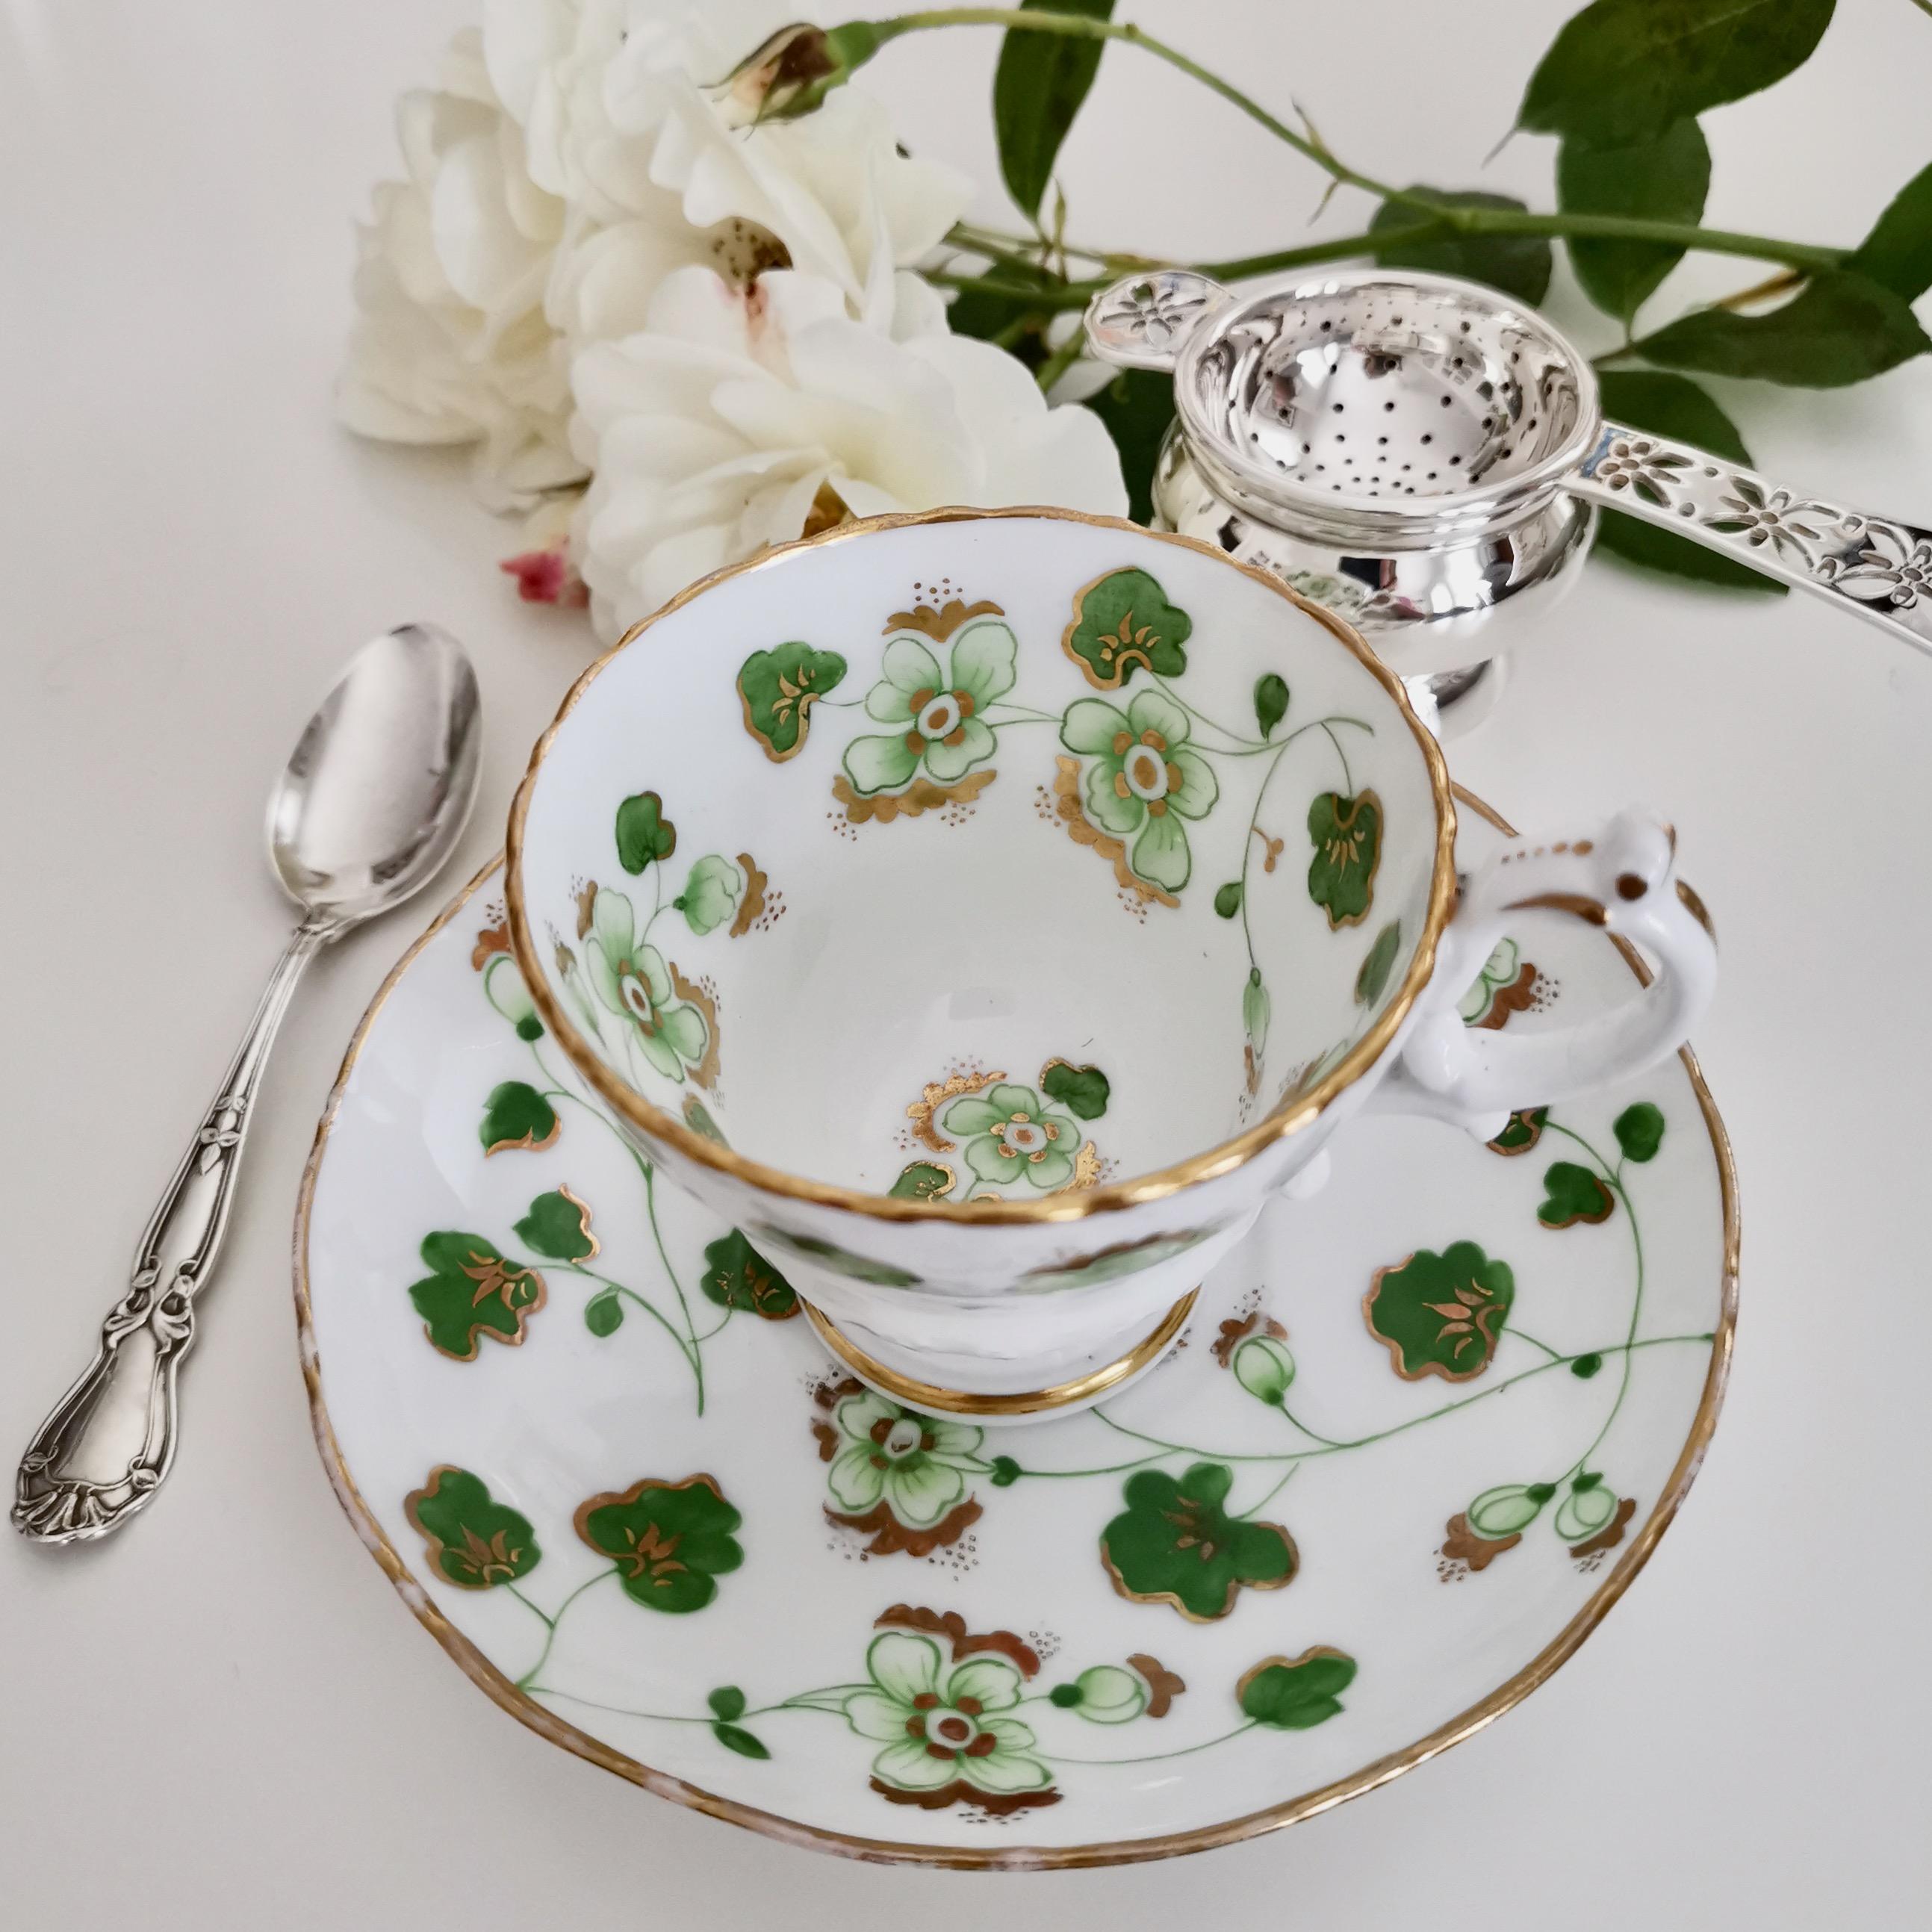 This is a very charming coffee cup and saucer made by Ridgway in about 1840, which was the early Victorian era. The set has a green floral design on bright white with the number 2/4023.

Ridgway was one of the pioneers of English china production